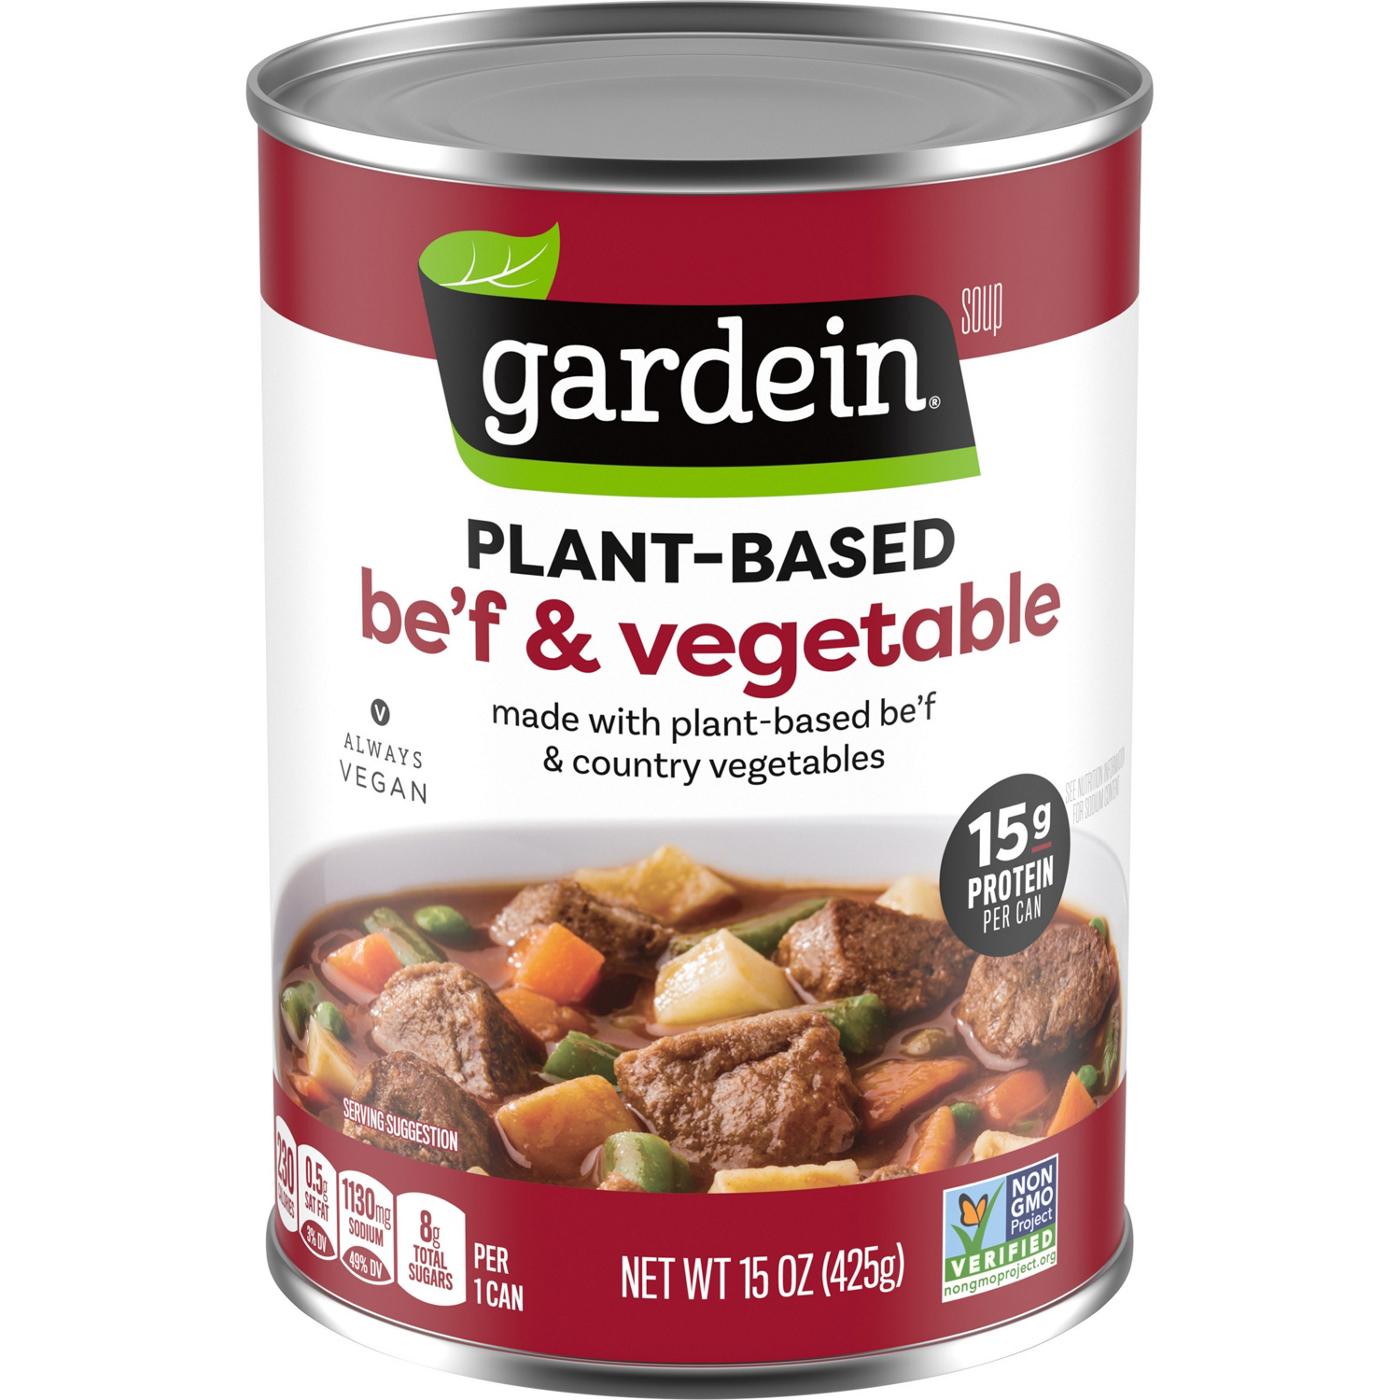 Gardein Vegan Plant-Based Be'f and Country Vegetable Soup; image 1 of 6